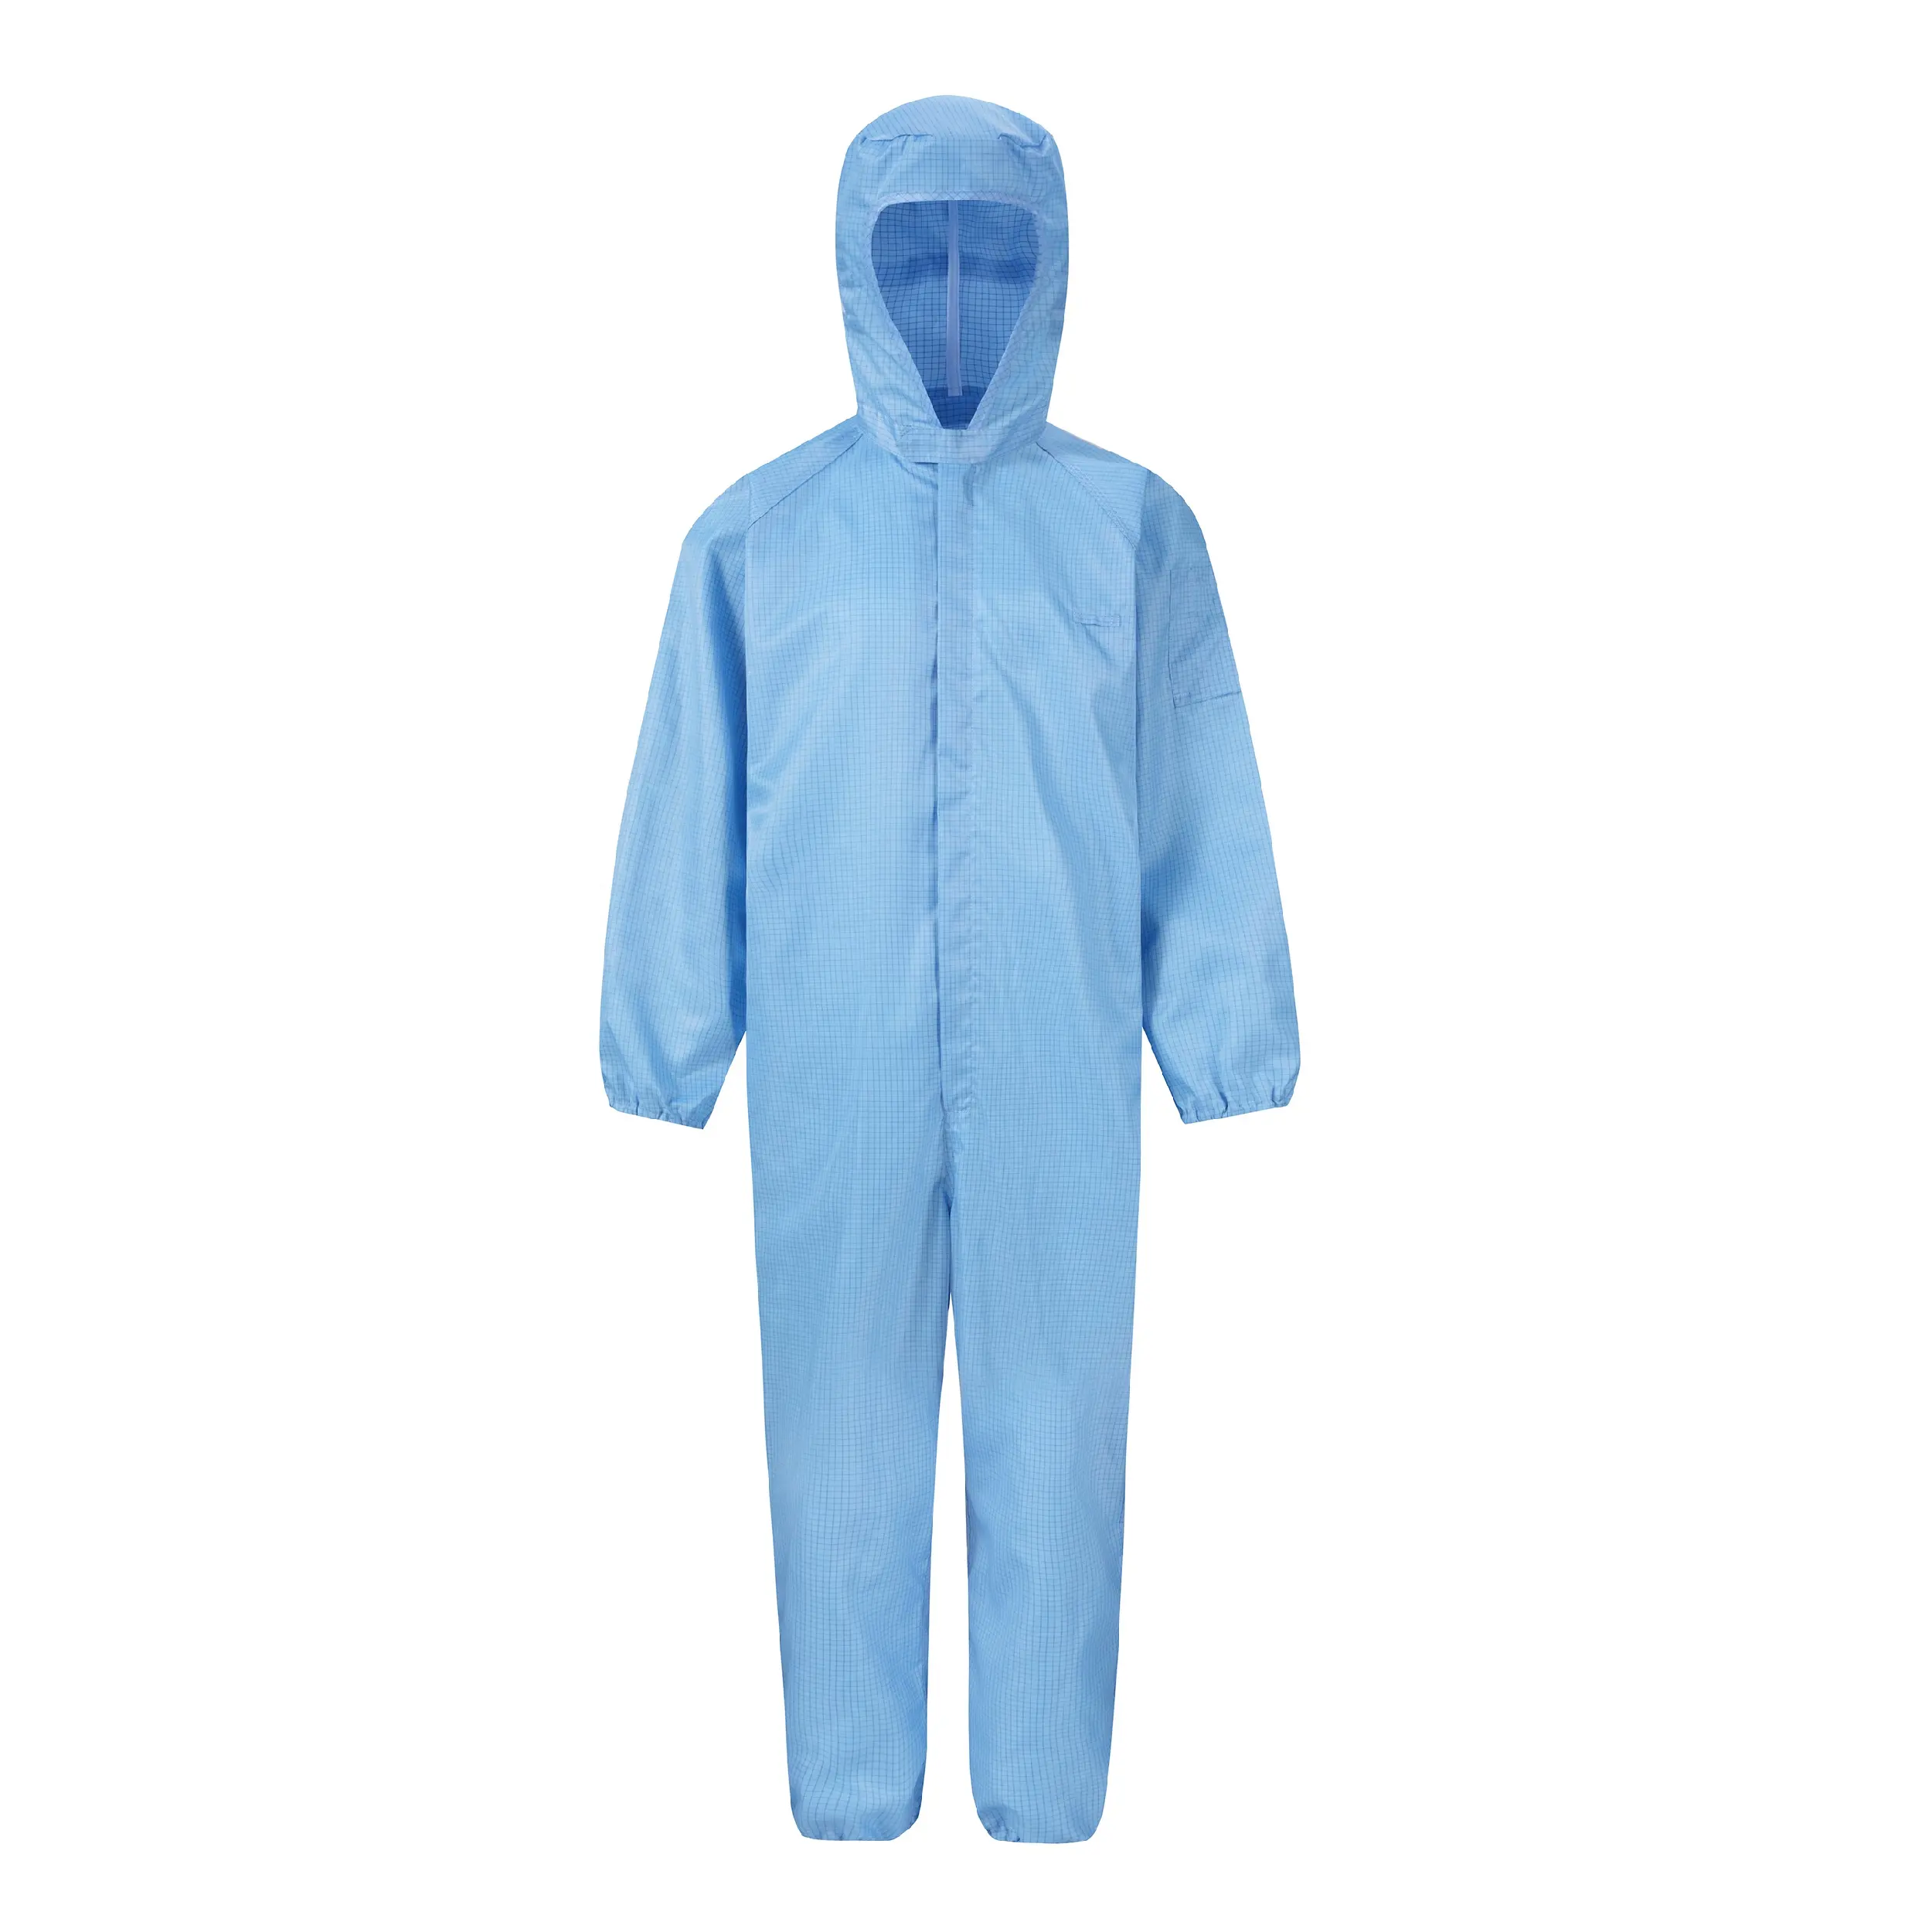 Waterproof Zipper Antistatic Jumpsuit Dust Proof Reusable Esd Jumpsuit Coverall ESD Suit Anti-Static Suit With Hood Headcover